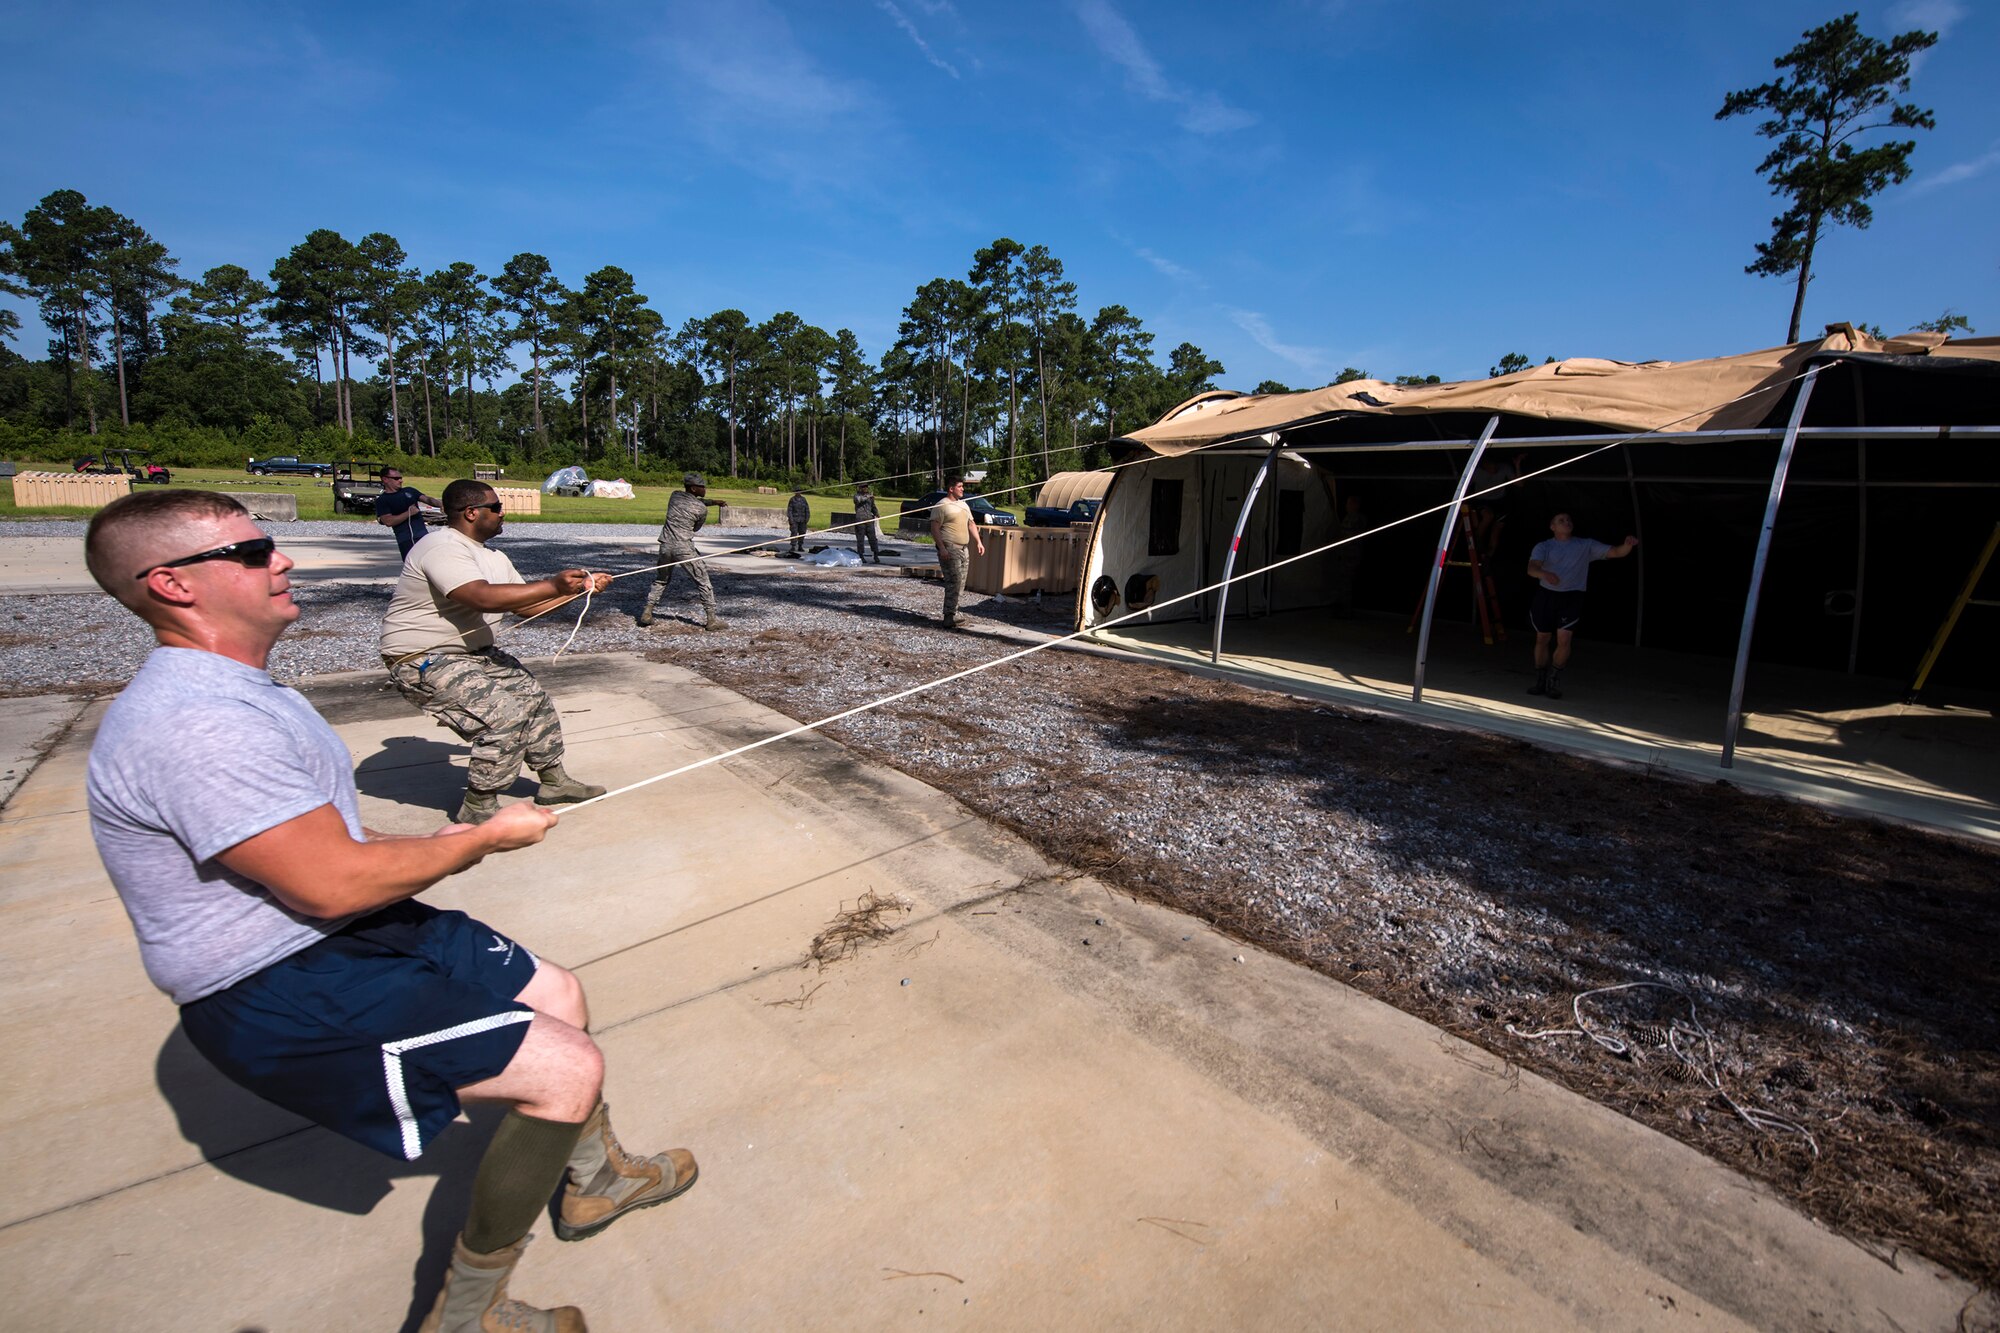 Airmen from the 23d Civil Engineer Squadron, pull a tarp over an Alaskan Small Shelter system during a Chemical, Biological, Radiological, Nuclear and Explosive (CBRNE) Olympics, June 21, 2018, at Moody Air Force Base, Ga. Moody held its first CBRNE Olympics to further Airmen’s overall knowledge on all of the aspects of CBRNE through a new method that was meant to establish a sense of competition and camaraderie. (U.S. Air Force photo by Airman 1st Class Eugene Oliver)